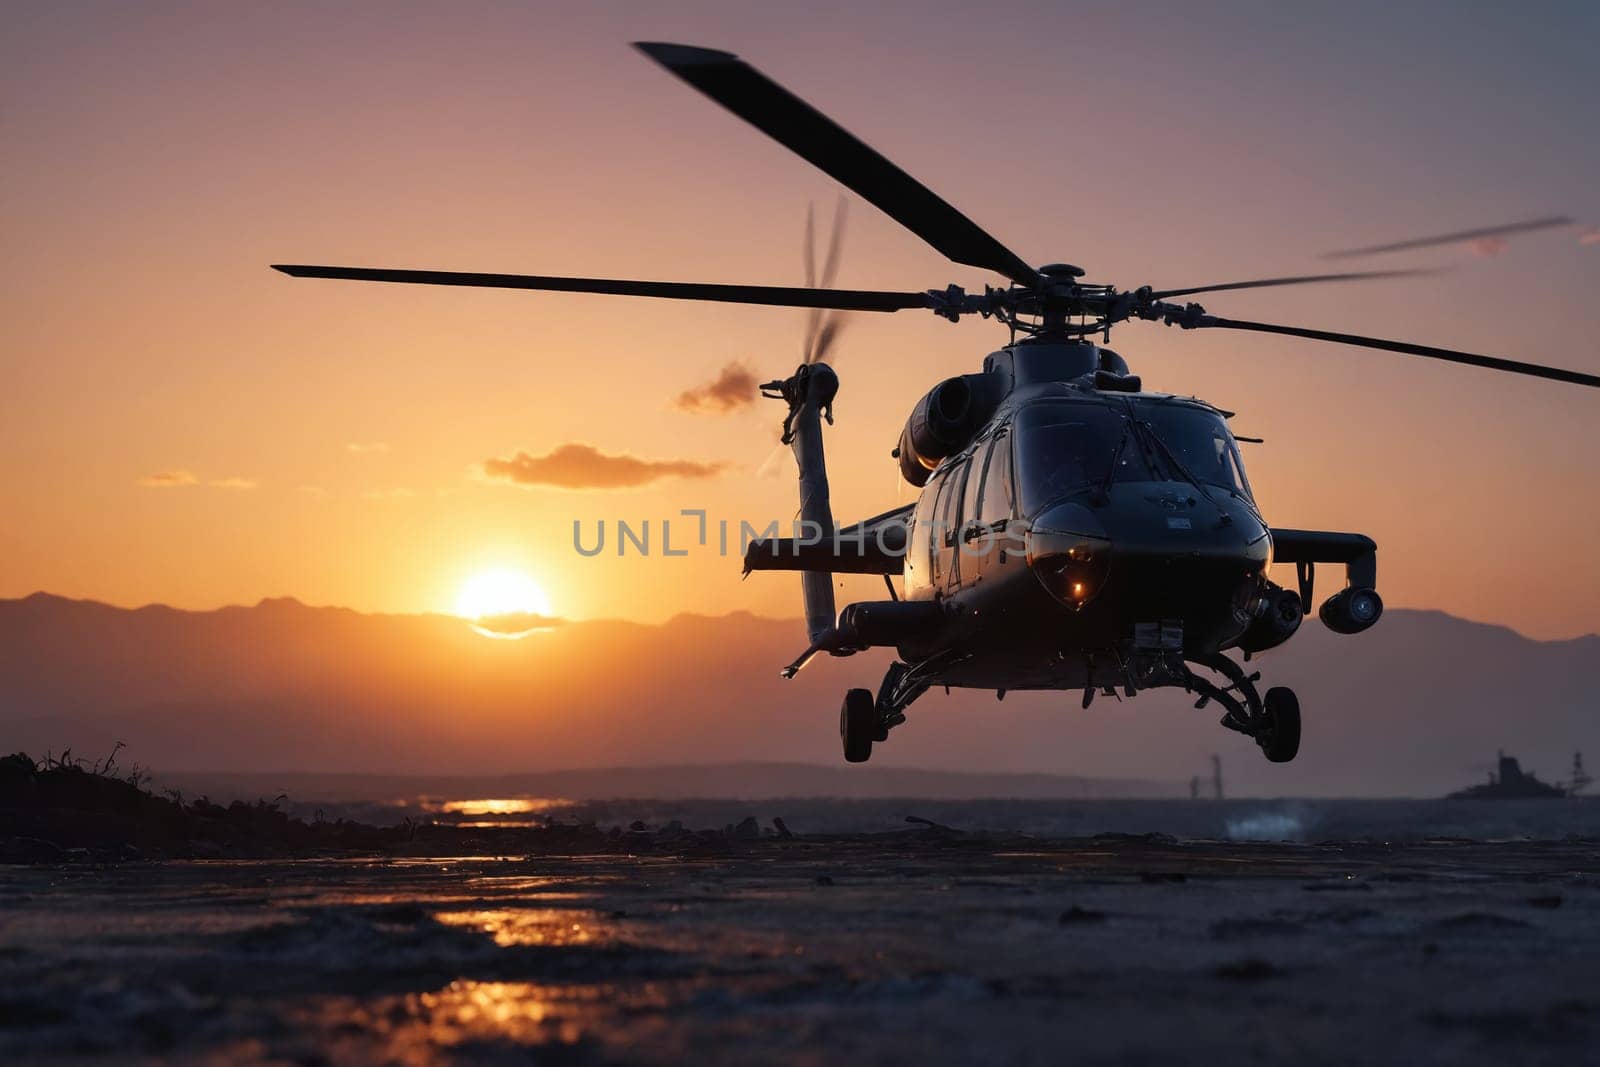 A powerful helicopter with its lights piercing the night, blades in motion, set against a twilight sky.